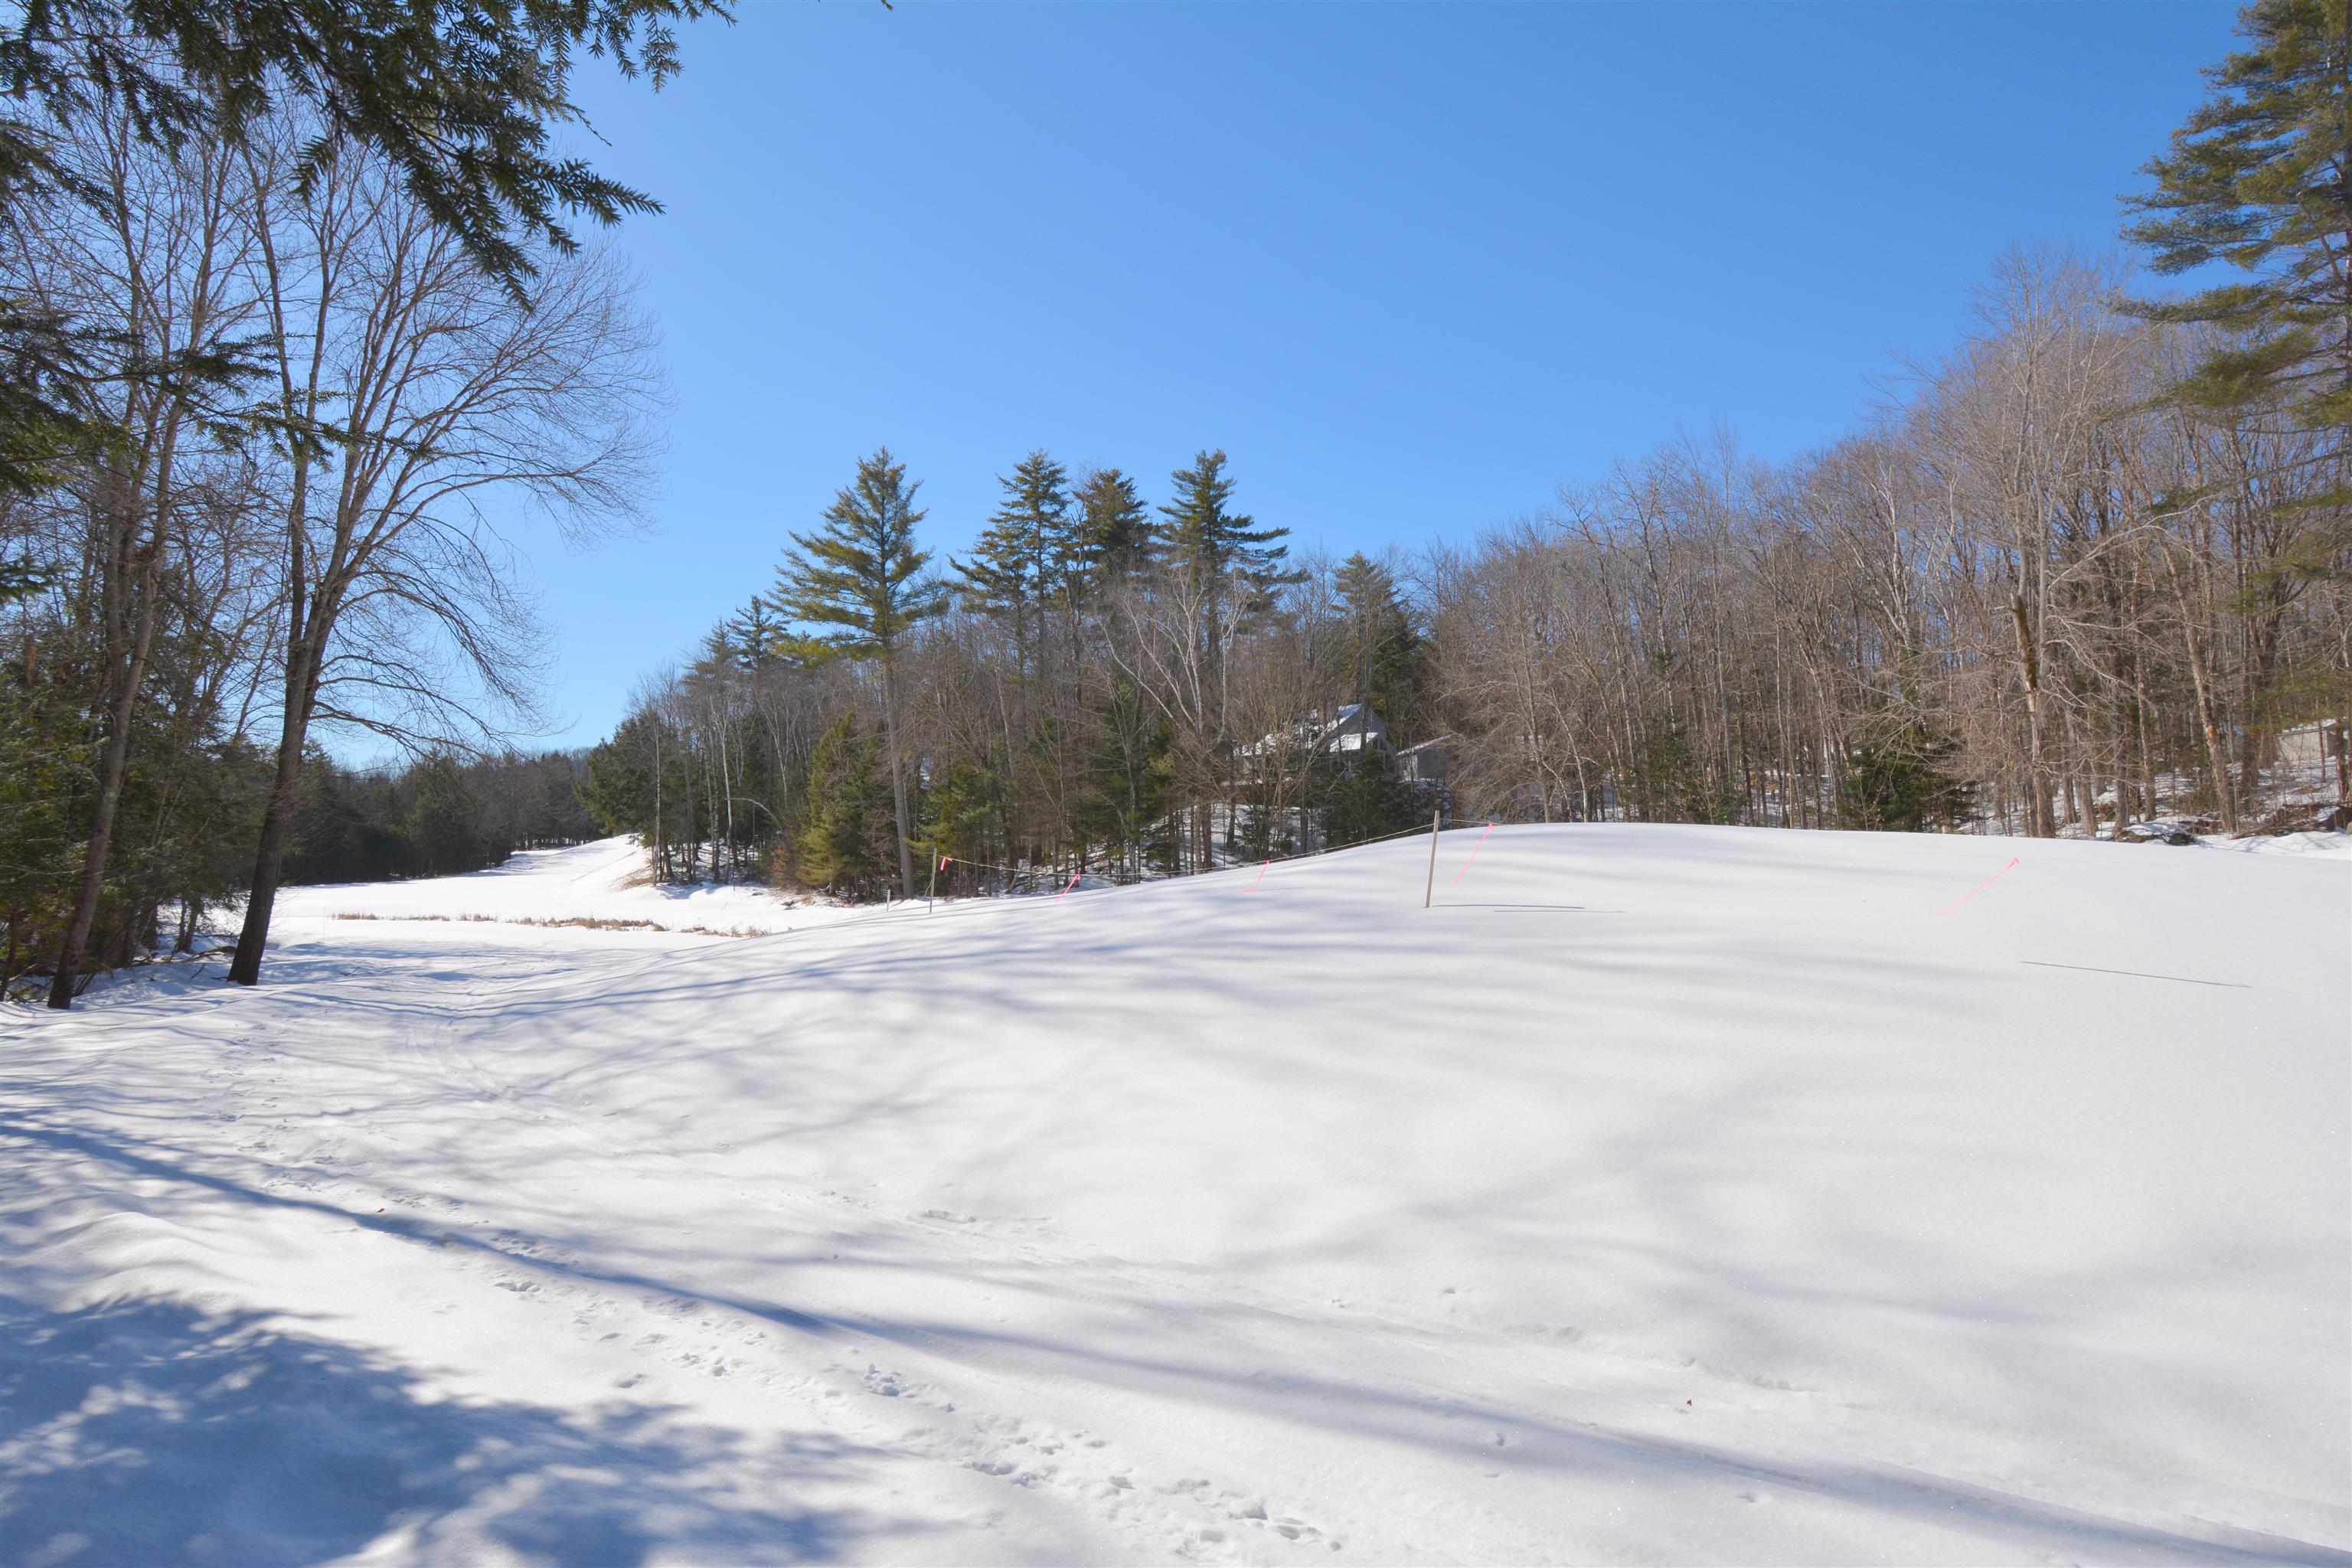 Enjoy the cross country skiing in winter and 13th fairway in summer